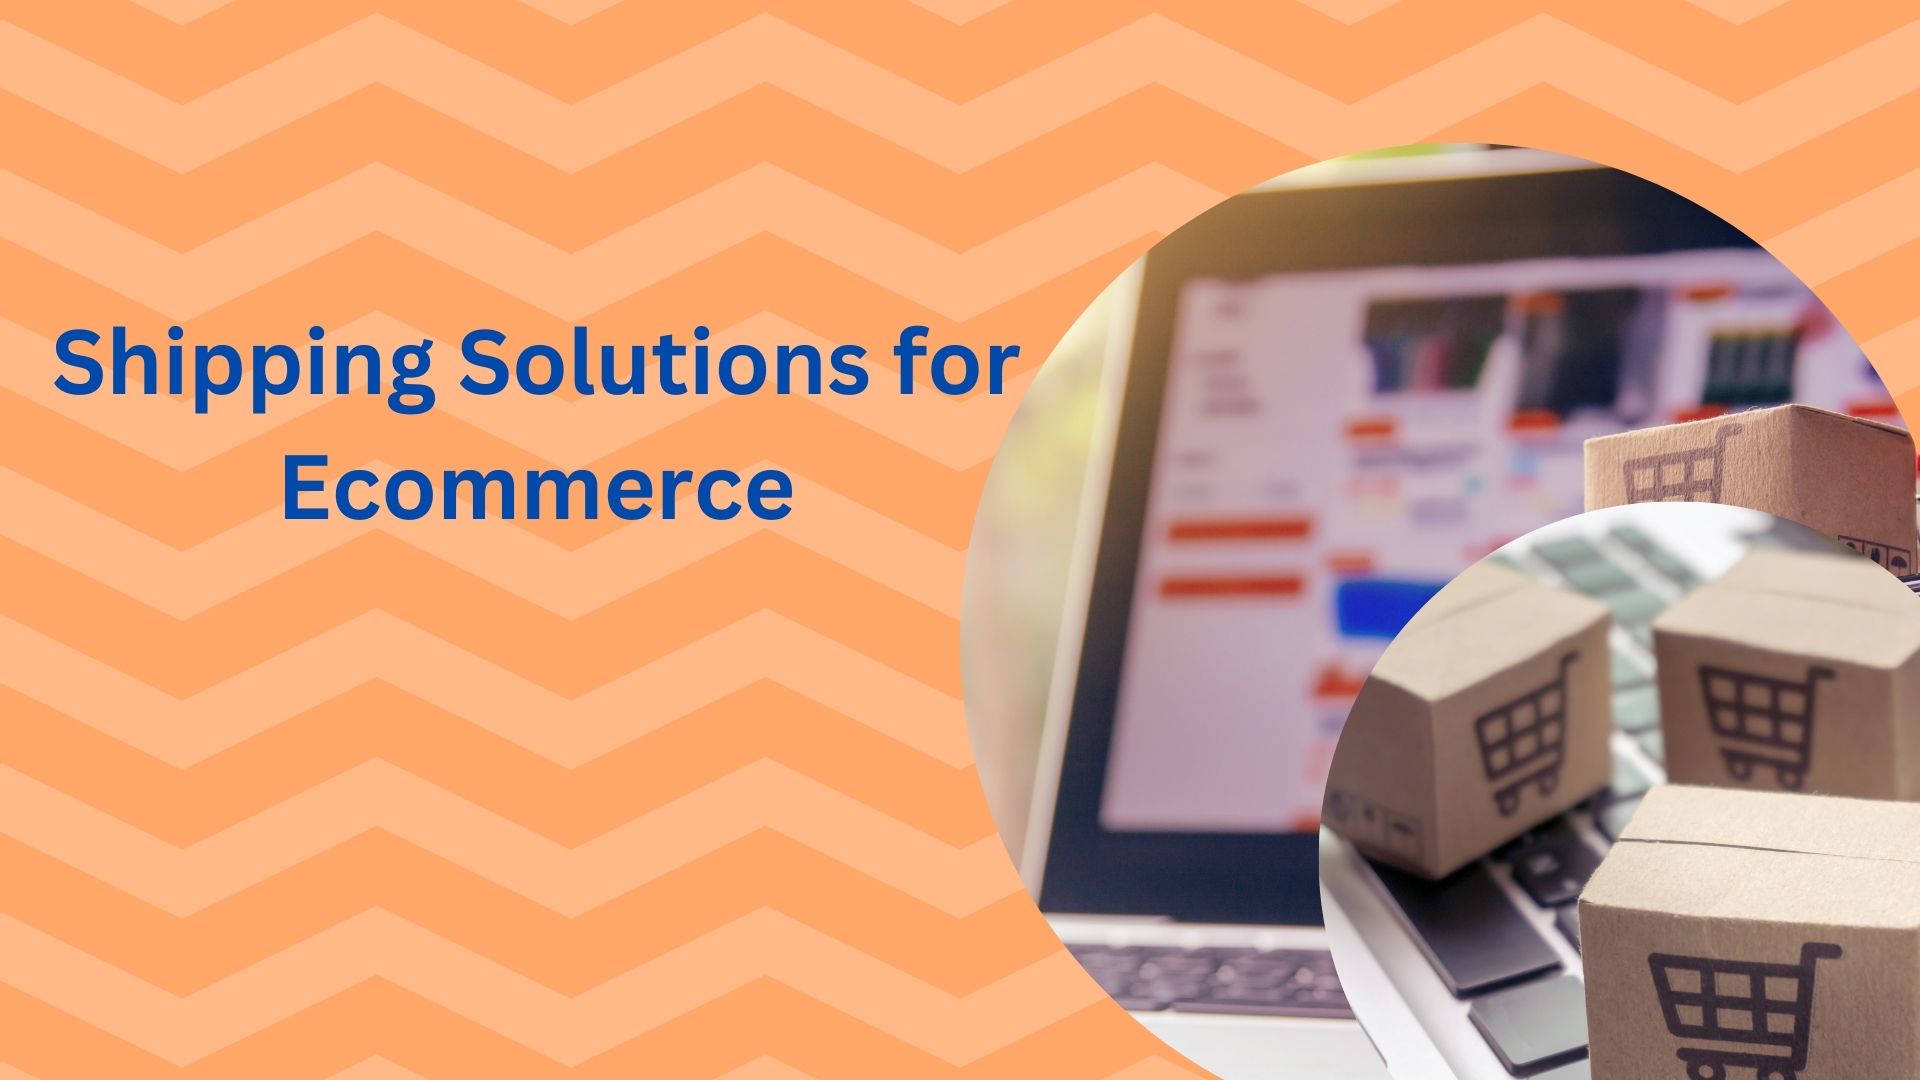 Shipping Solutions for Ecommerce